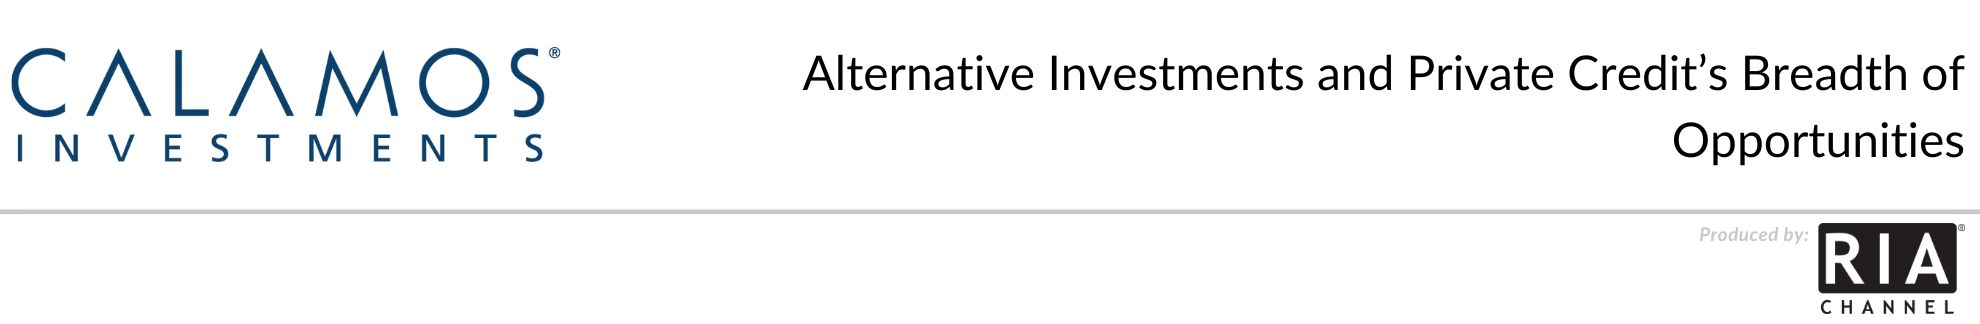 Alternative Investments and Private Credit’s Breadth of Opportunities